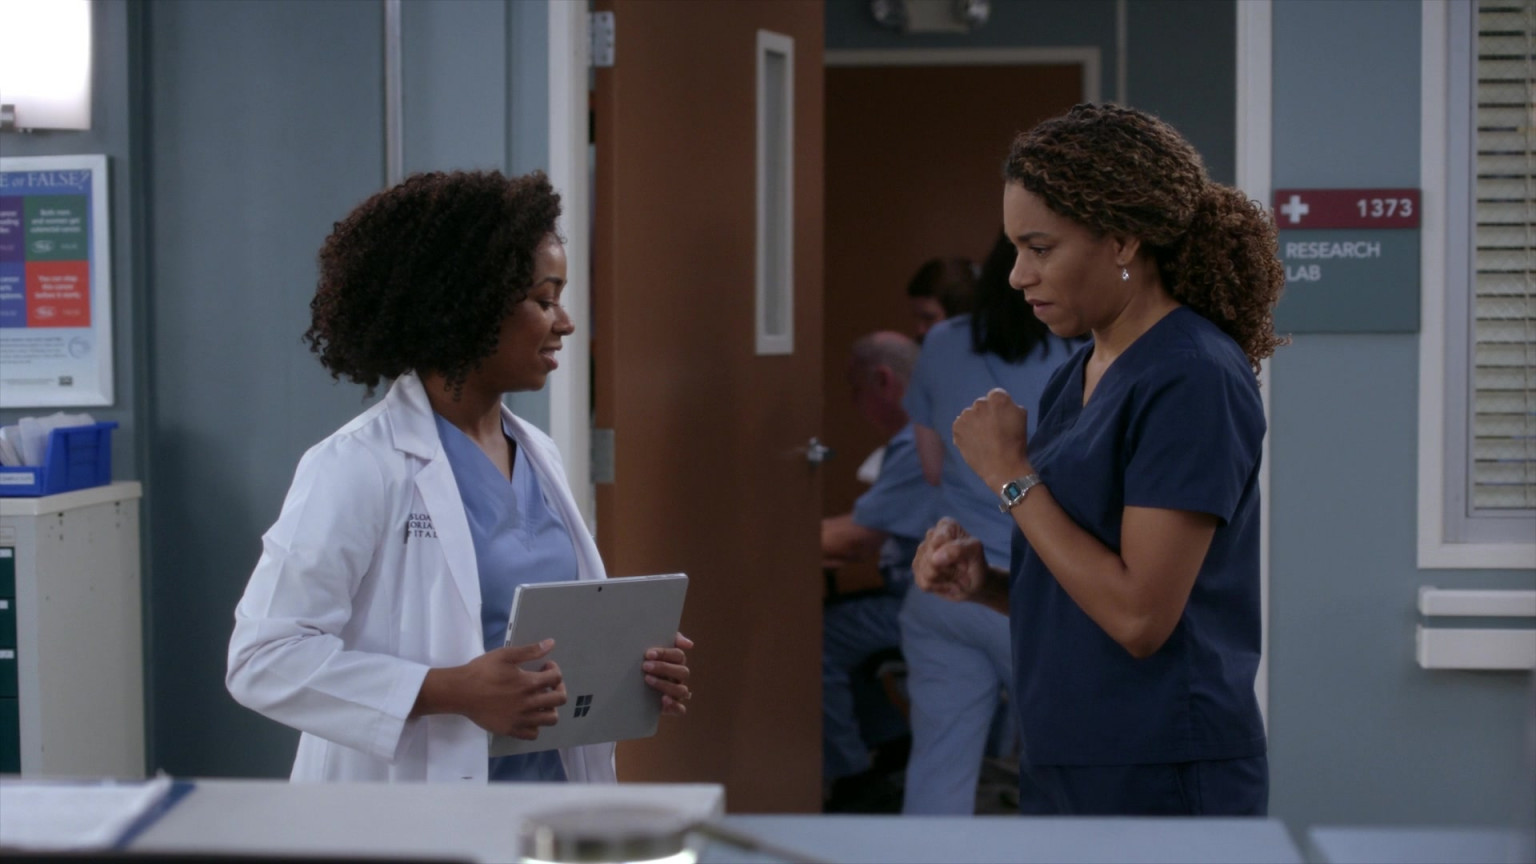 Microsoft Surface tablet displayed in Grey's Anatomy.